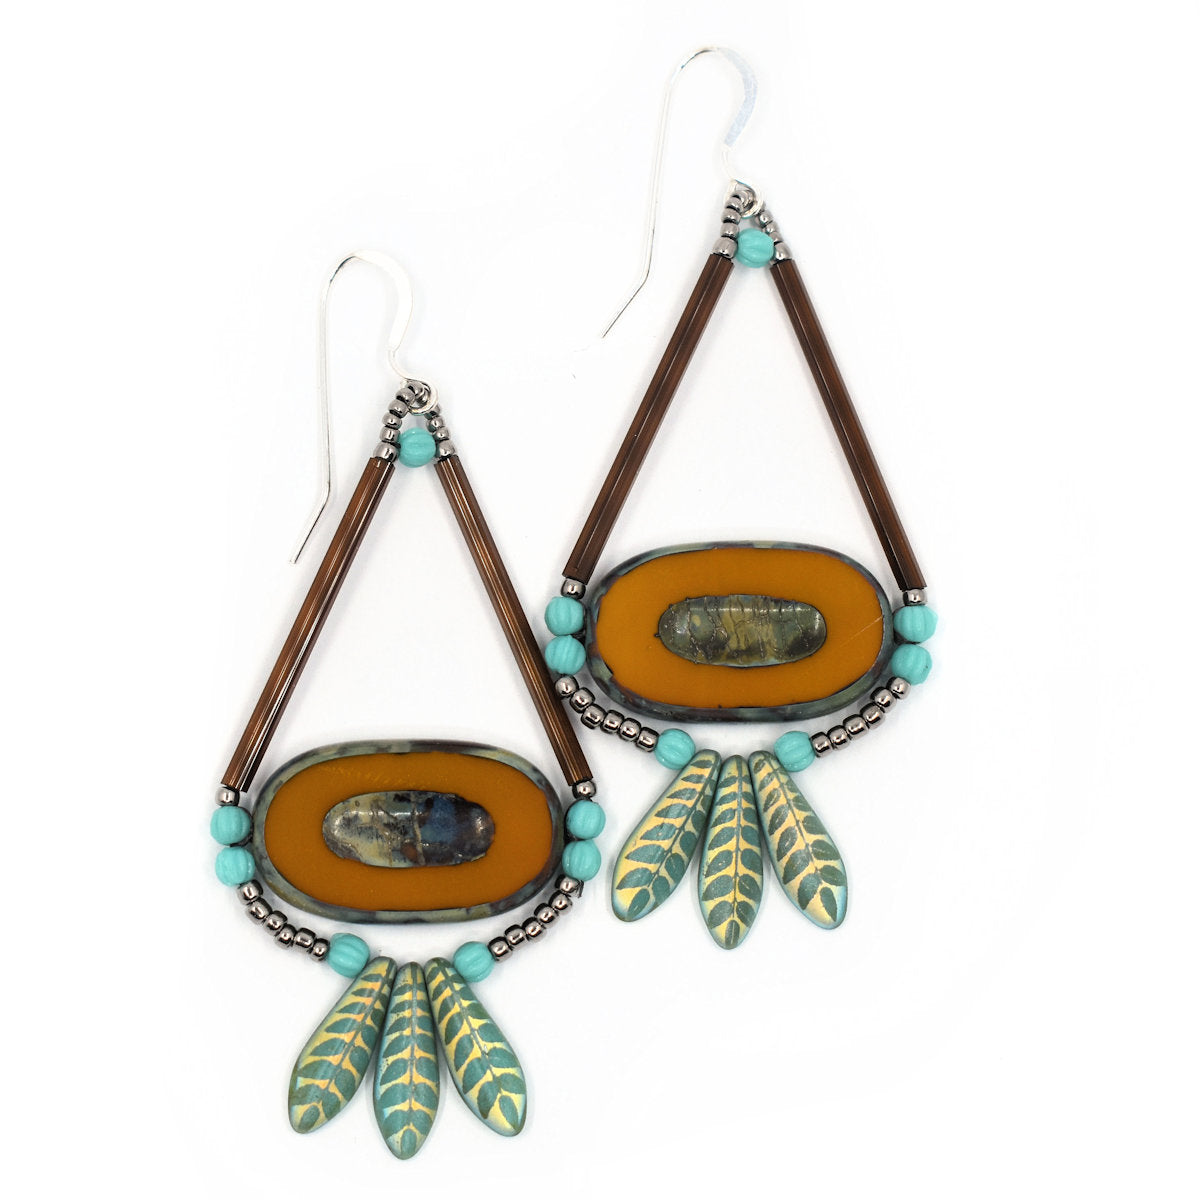 Orange and turquoise earrings shaped liked wide teardrops lay on a white background. The earrings have large orange oval beads that have a smaller speckled oval embossed into them. The ovals are suspended from two long brown tube beads that form a triangle. At the bottom of the ovals is a swag of small round turquoise beads, silver seed beads, and a fan of three gold-green dagger shaped beads that have a leaf pattern on them. The earrings have silver ear wires.